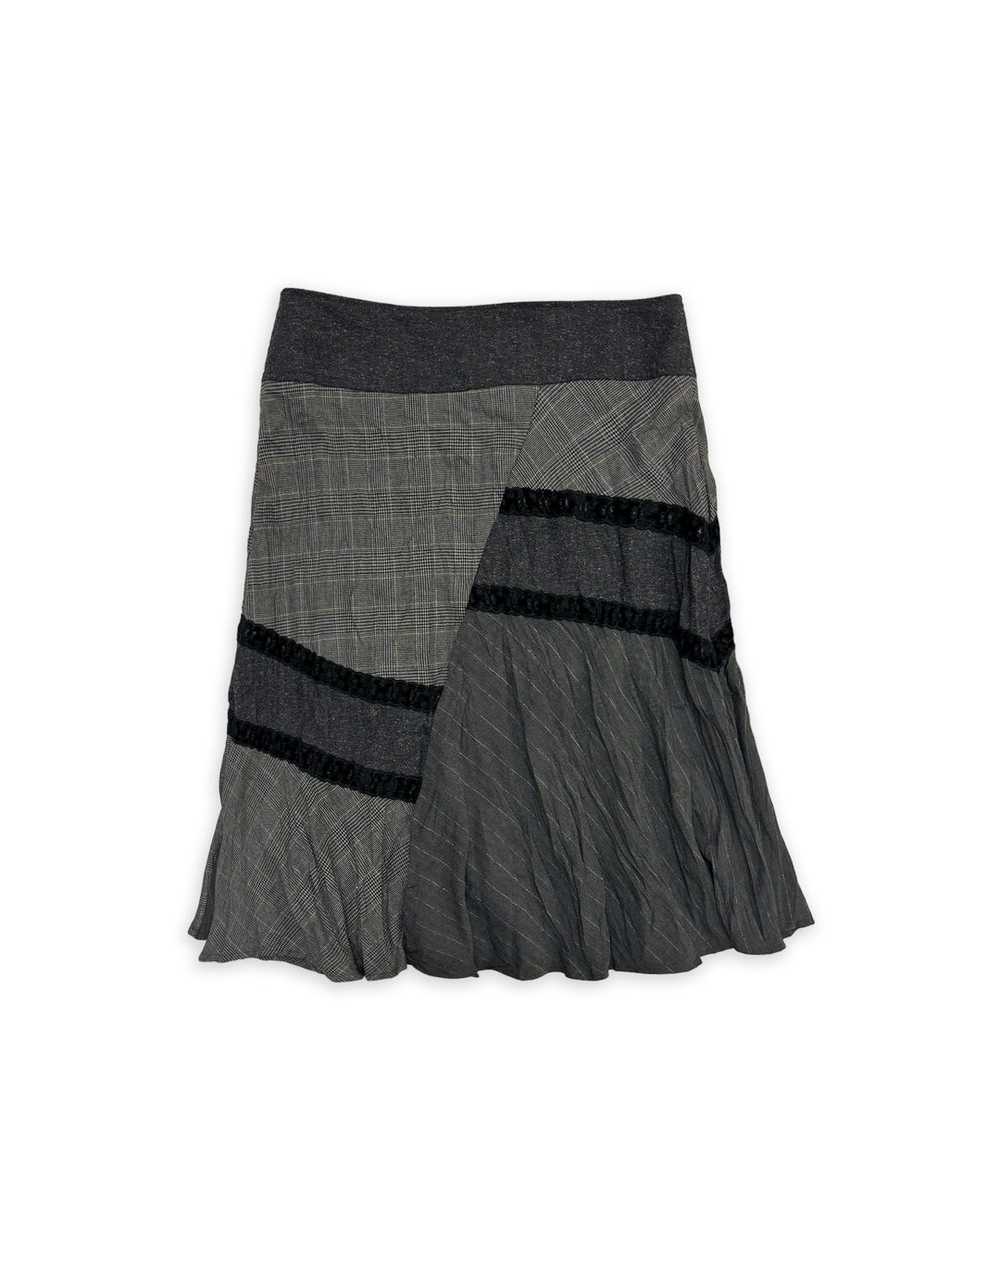 GREY HOUNDSTOOTH AND PINSTRIPE MIDI SKIRT (W38) - image 2